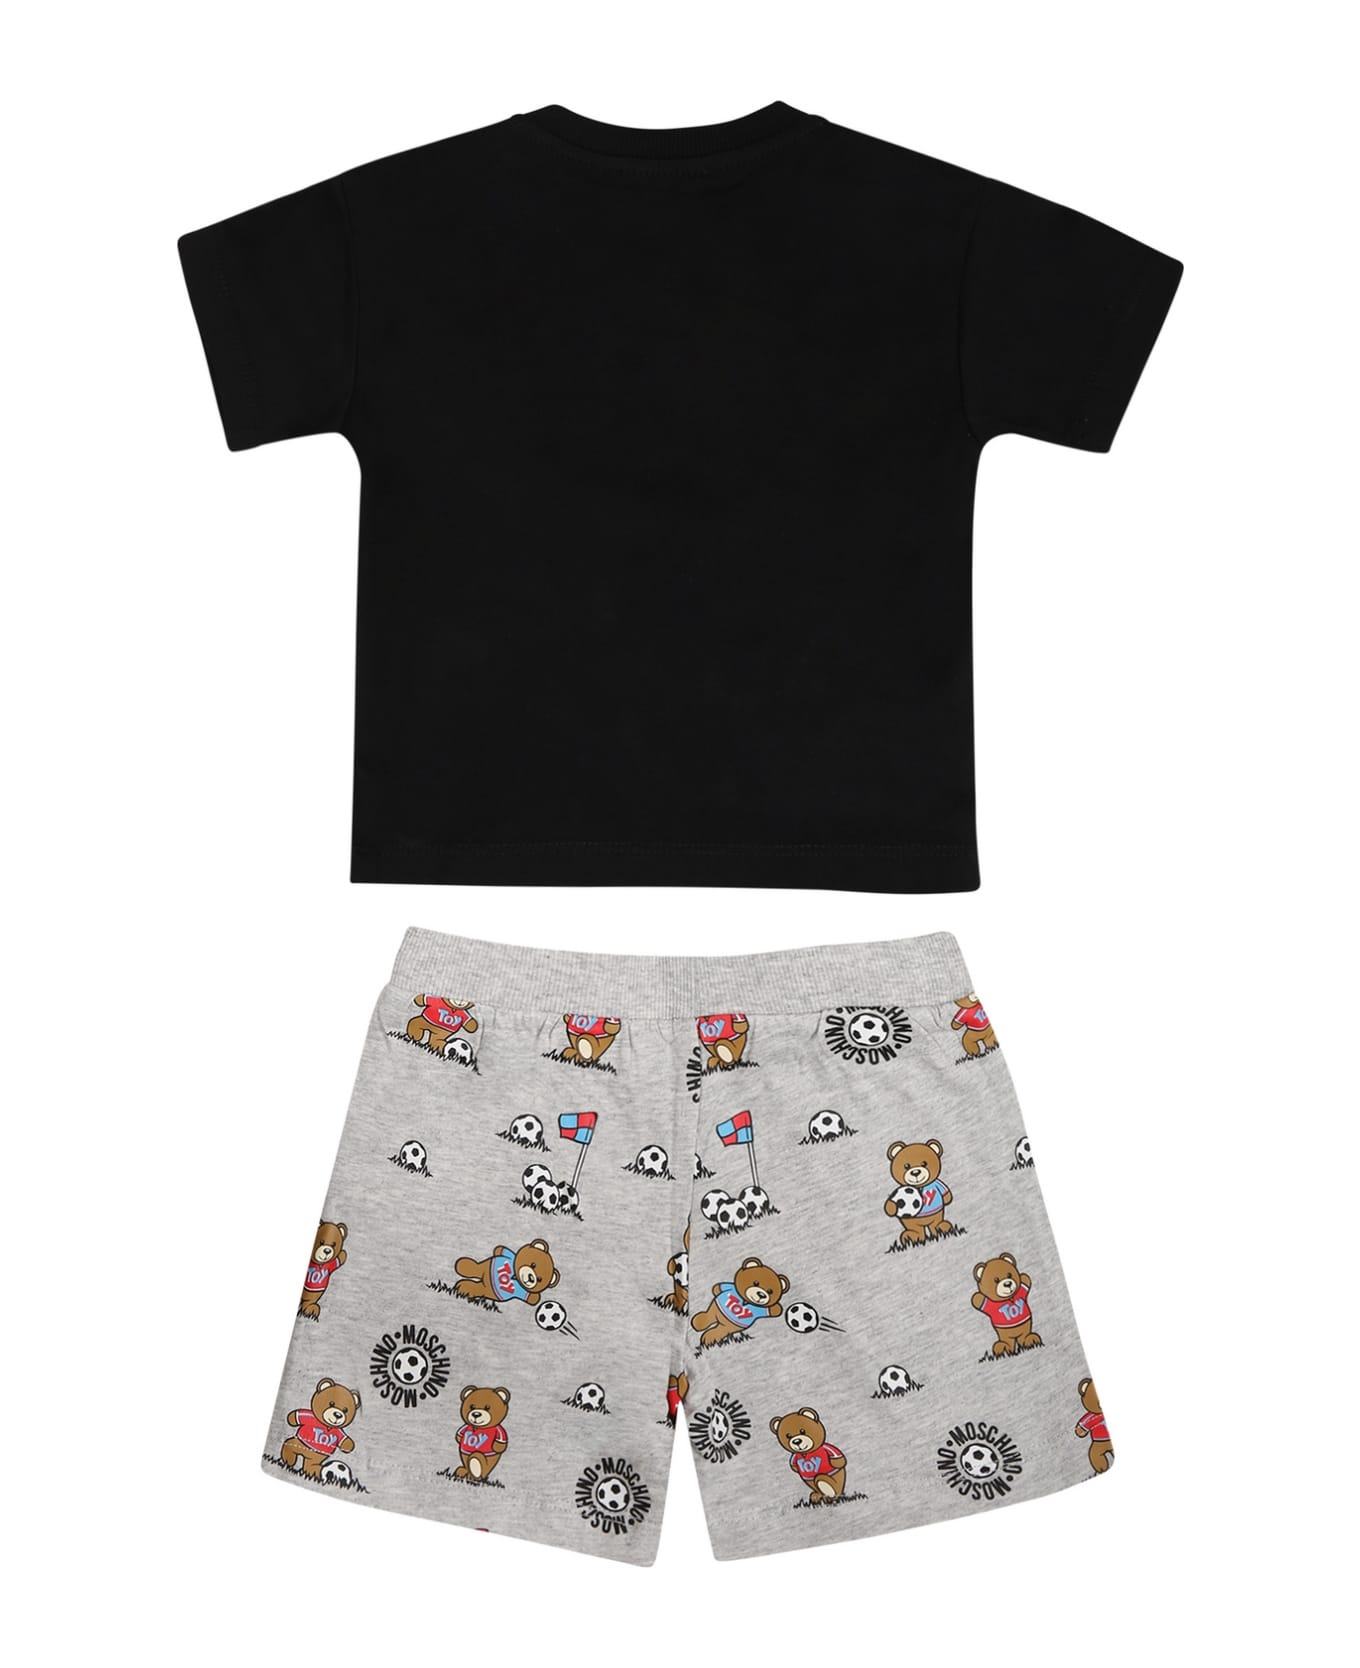 Moschino Black Suit For Baby Boy With Teddy Bear And Logo - Black